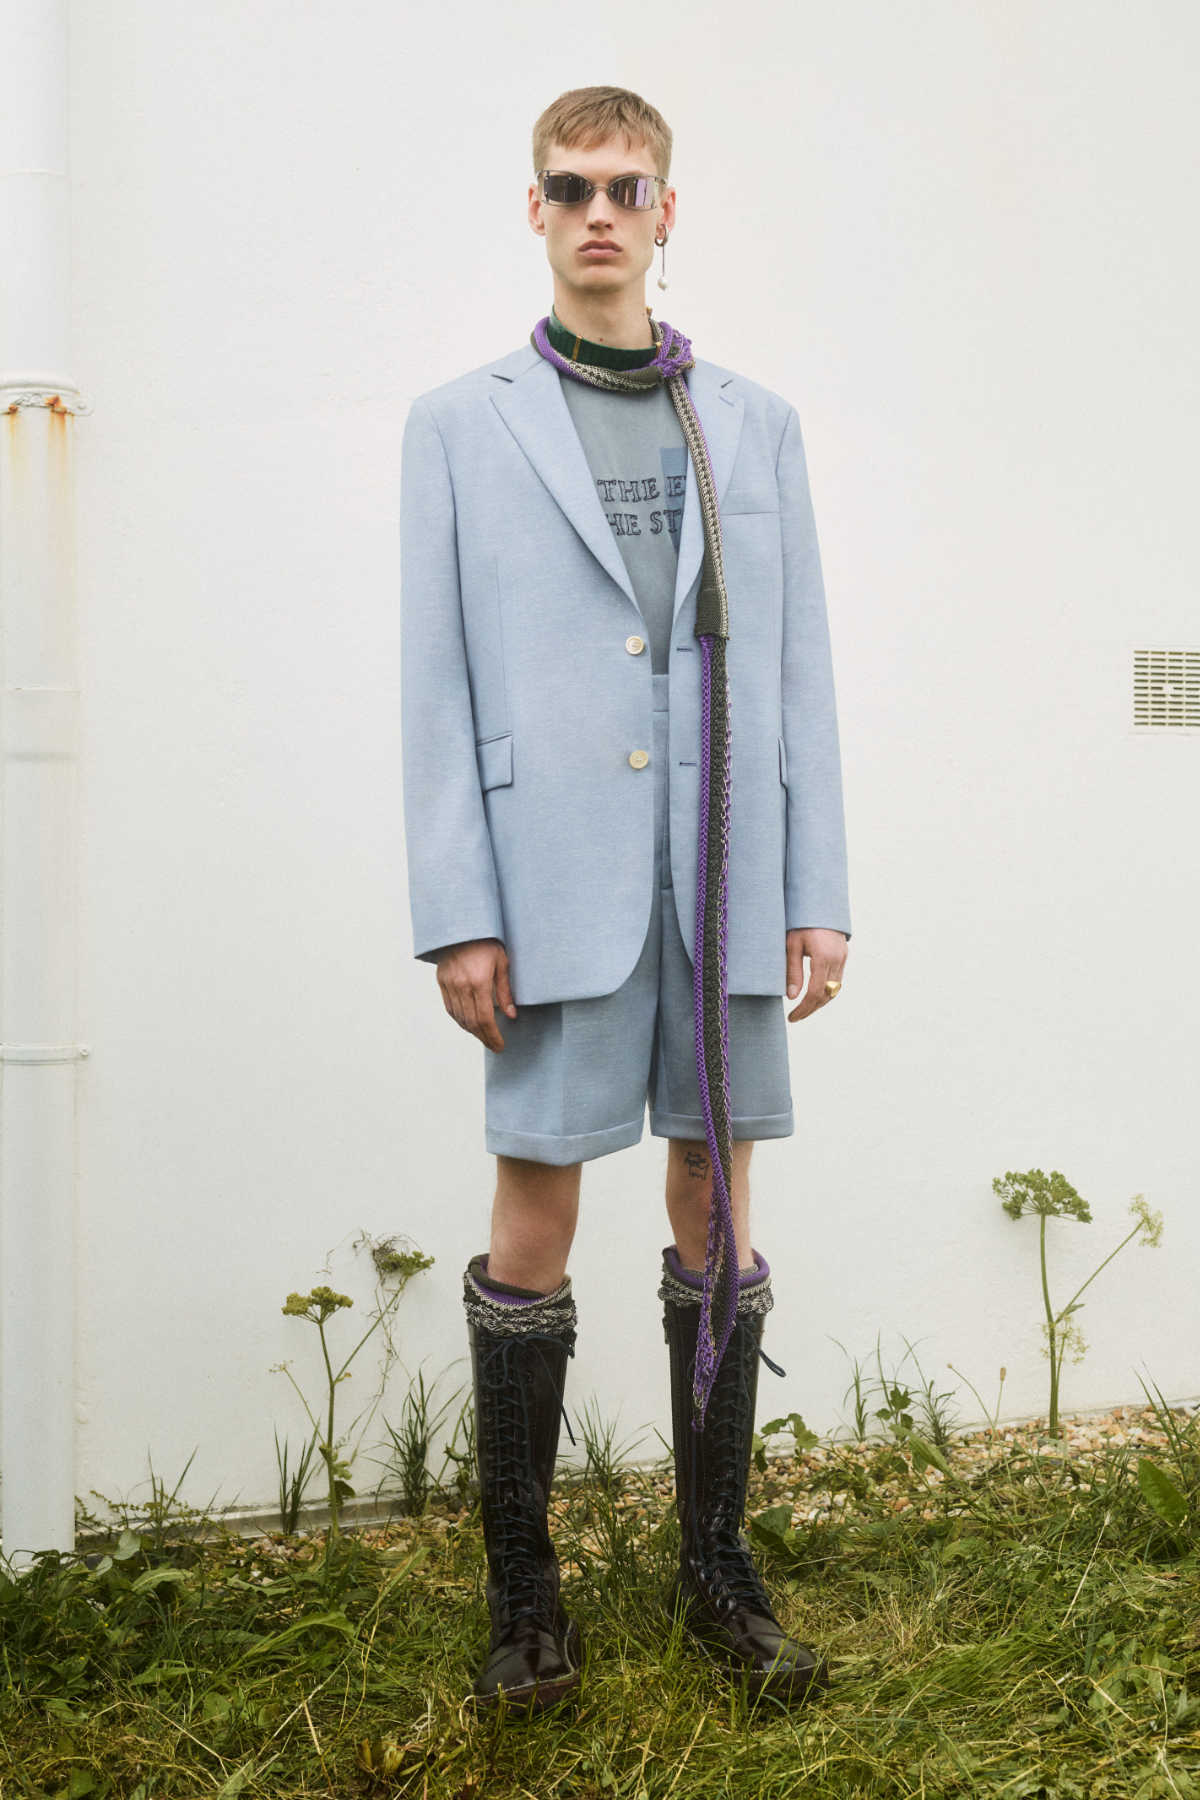 Acne Studios Presents Its New Men’s Spring/Summer 2022 Collection